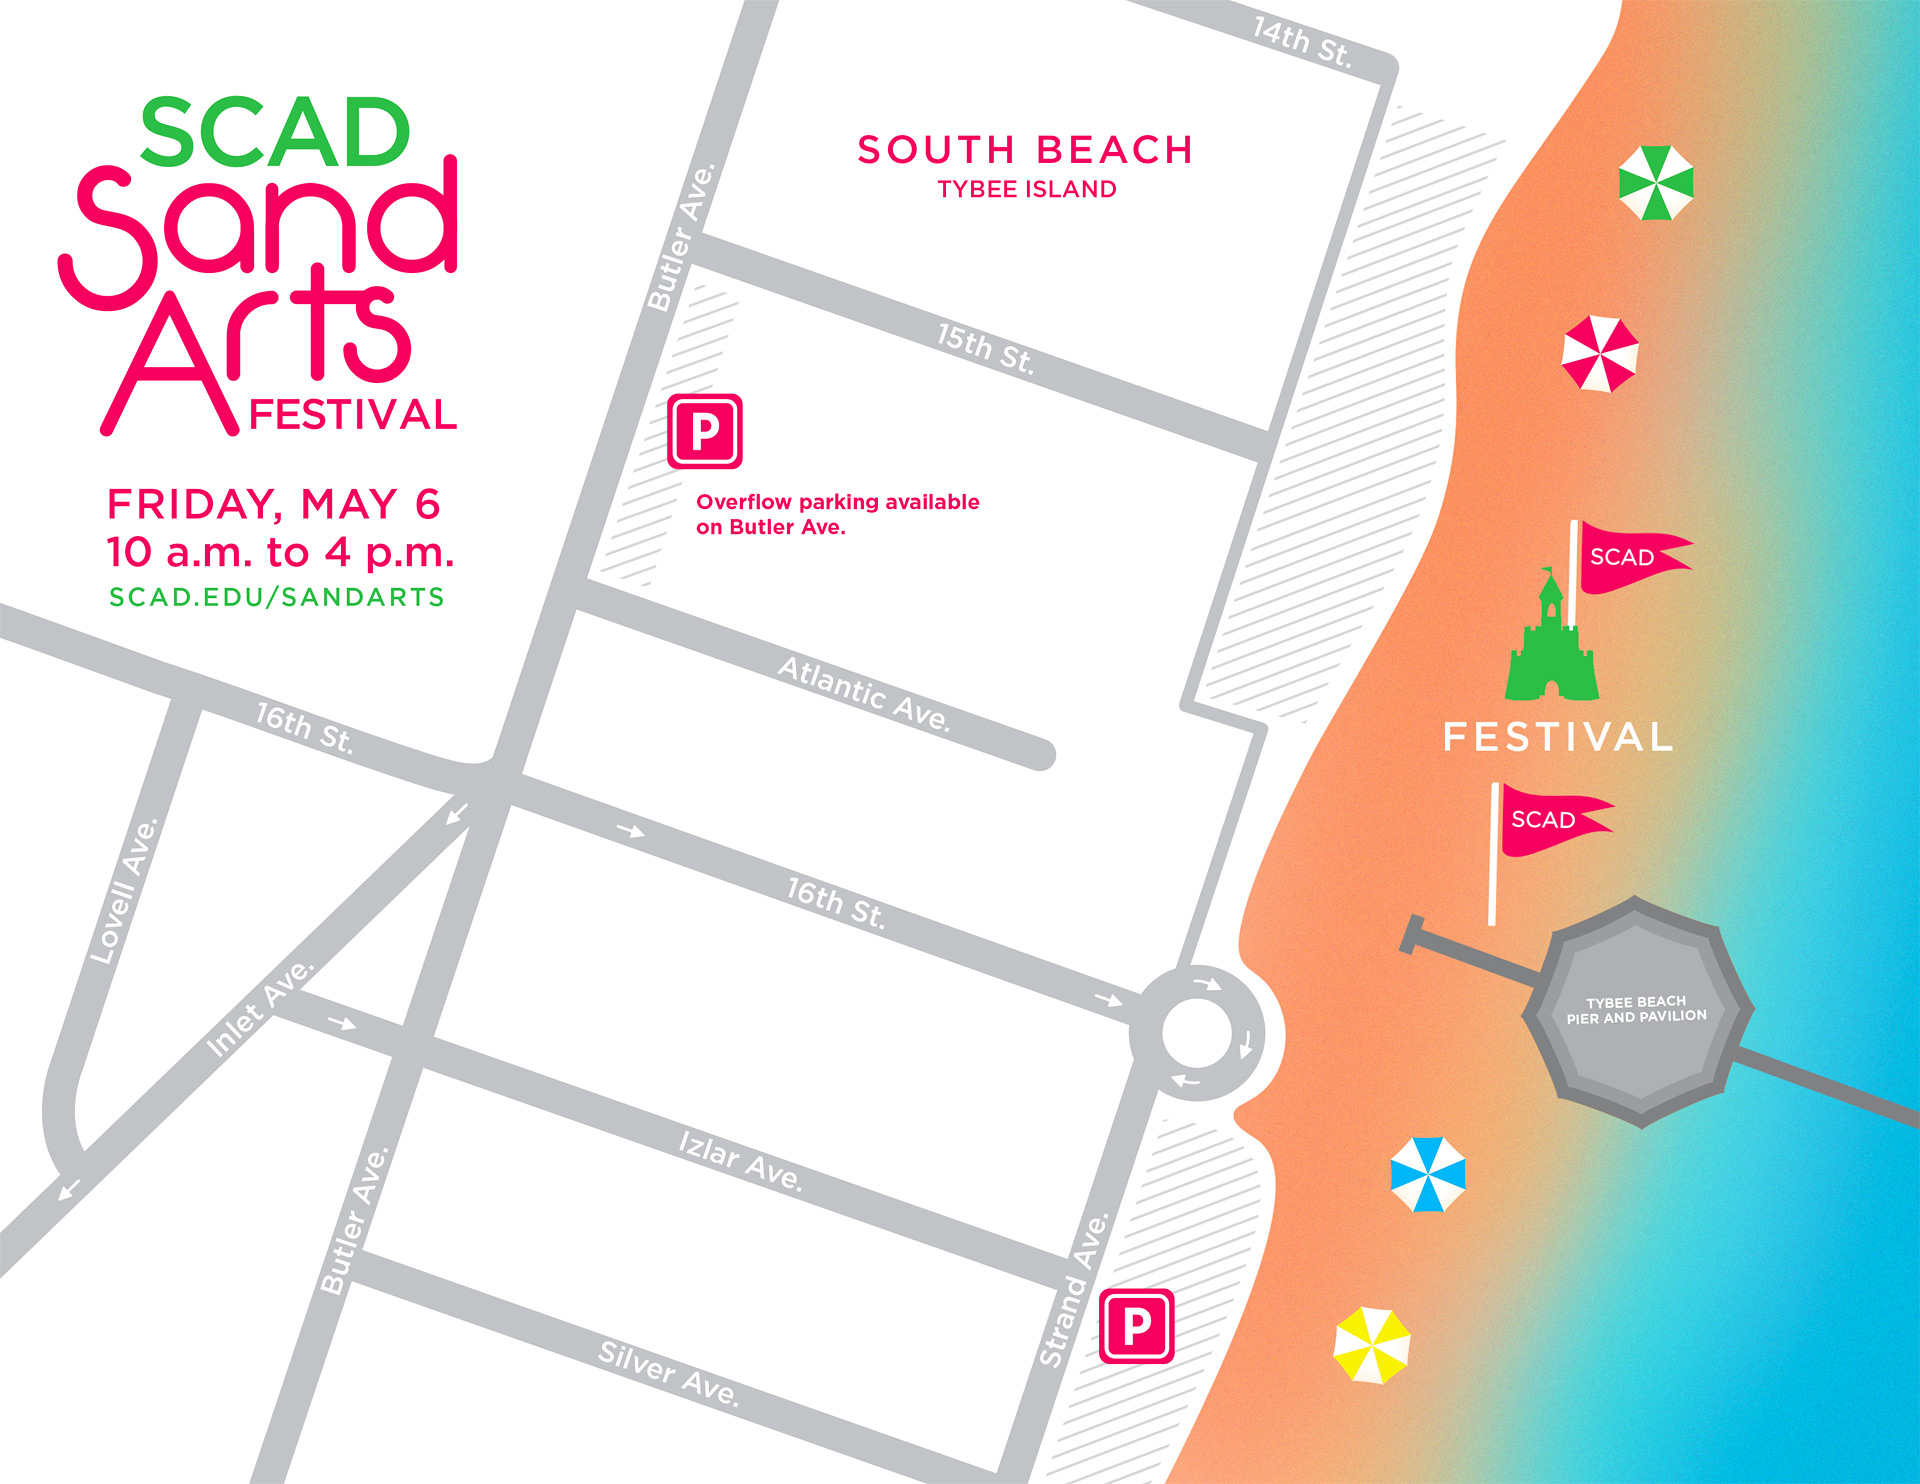 Ready your shades and shovels at SCAD Sand Arts Festival 2022 SCAD.edu